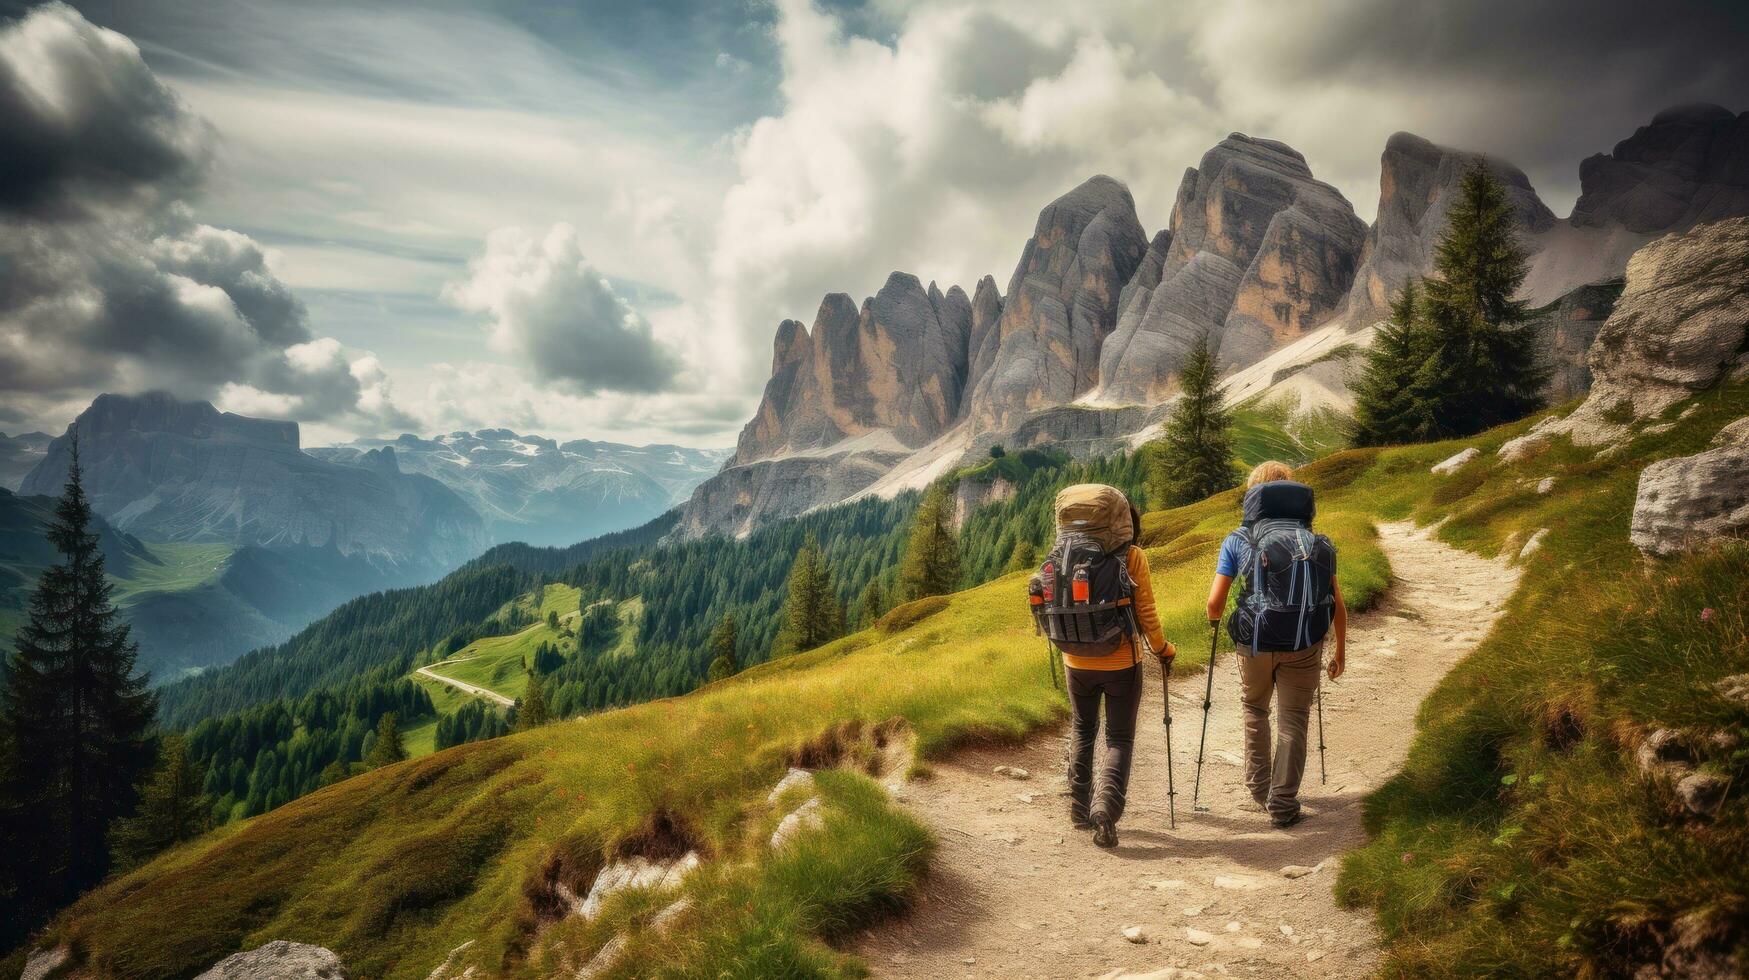 Hiking in the dolomites with backpacks on the trail photo